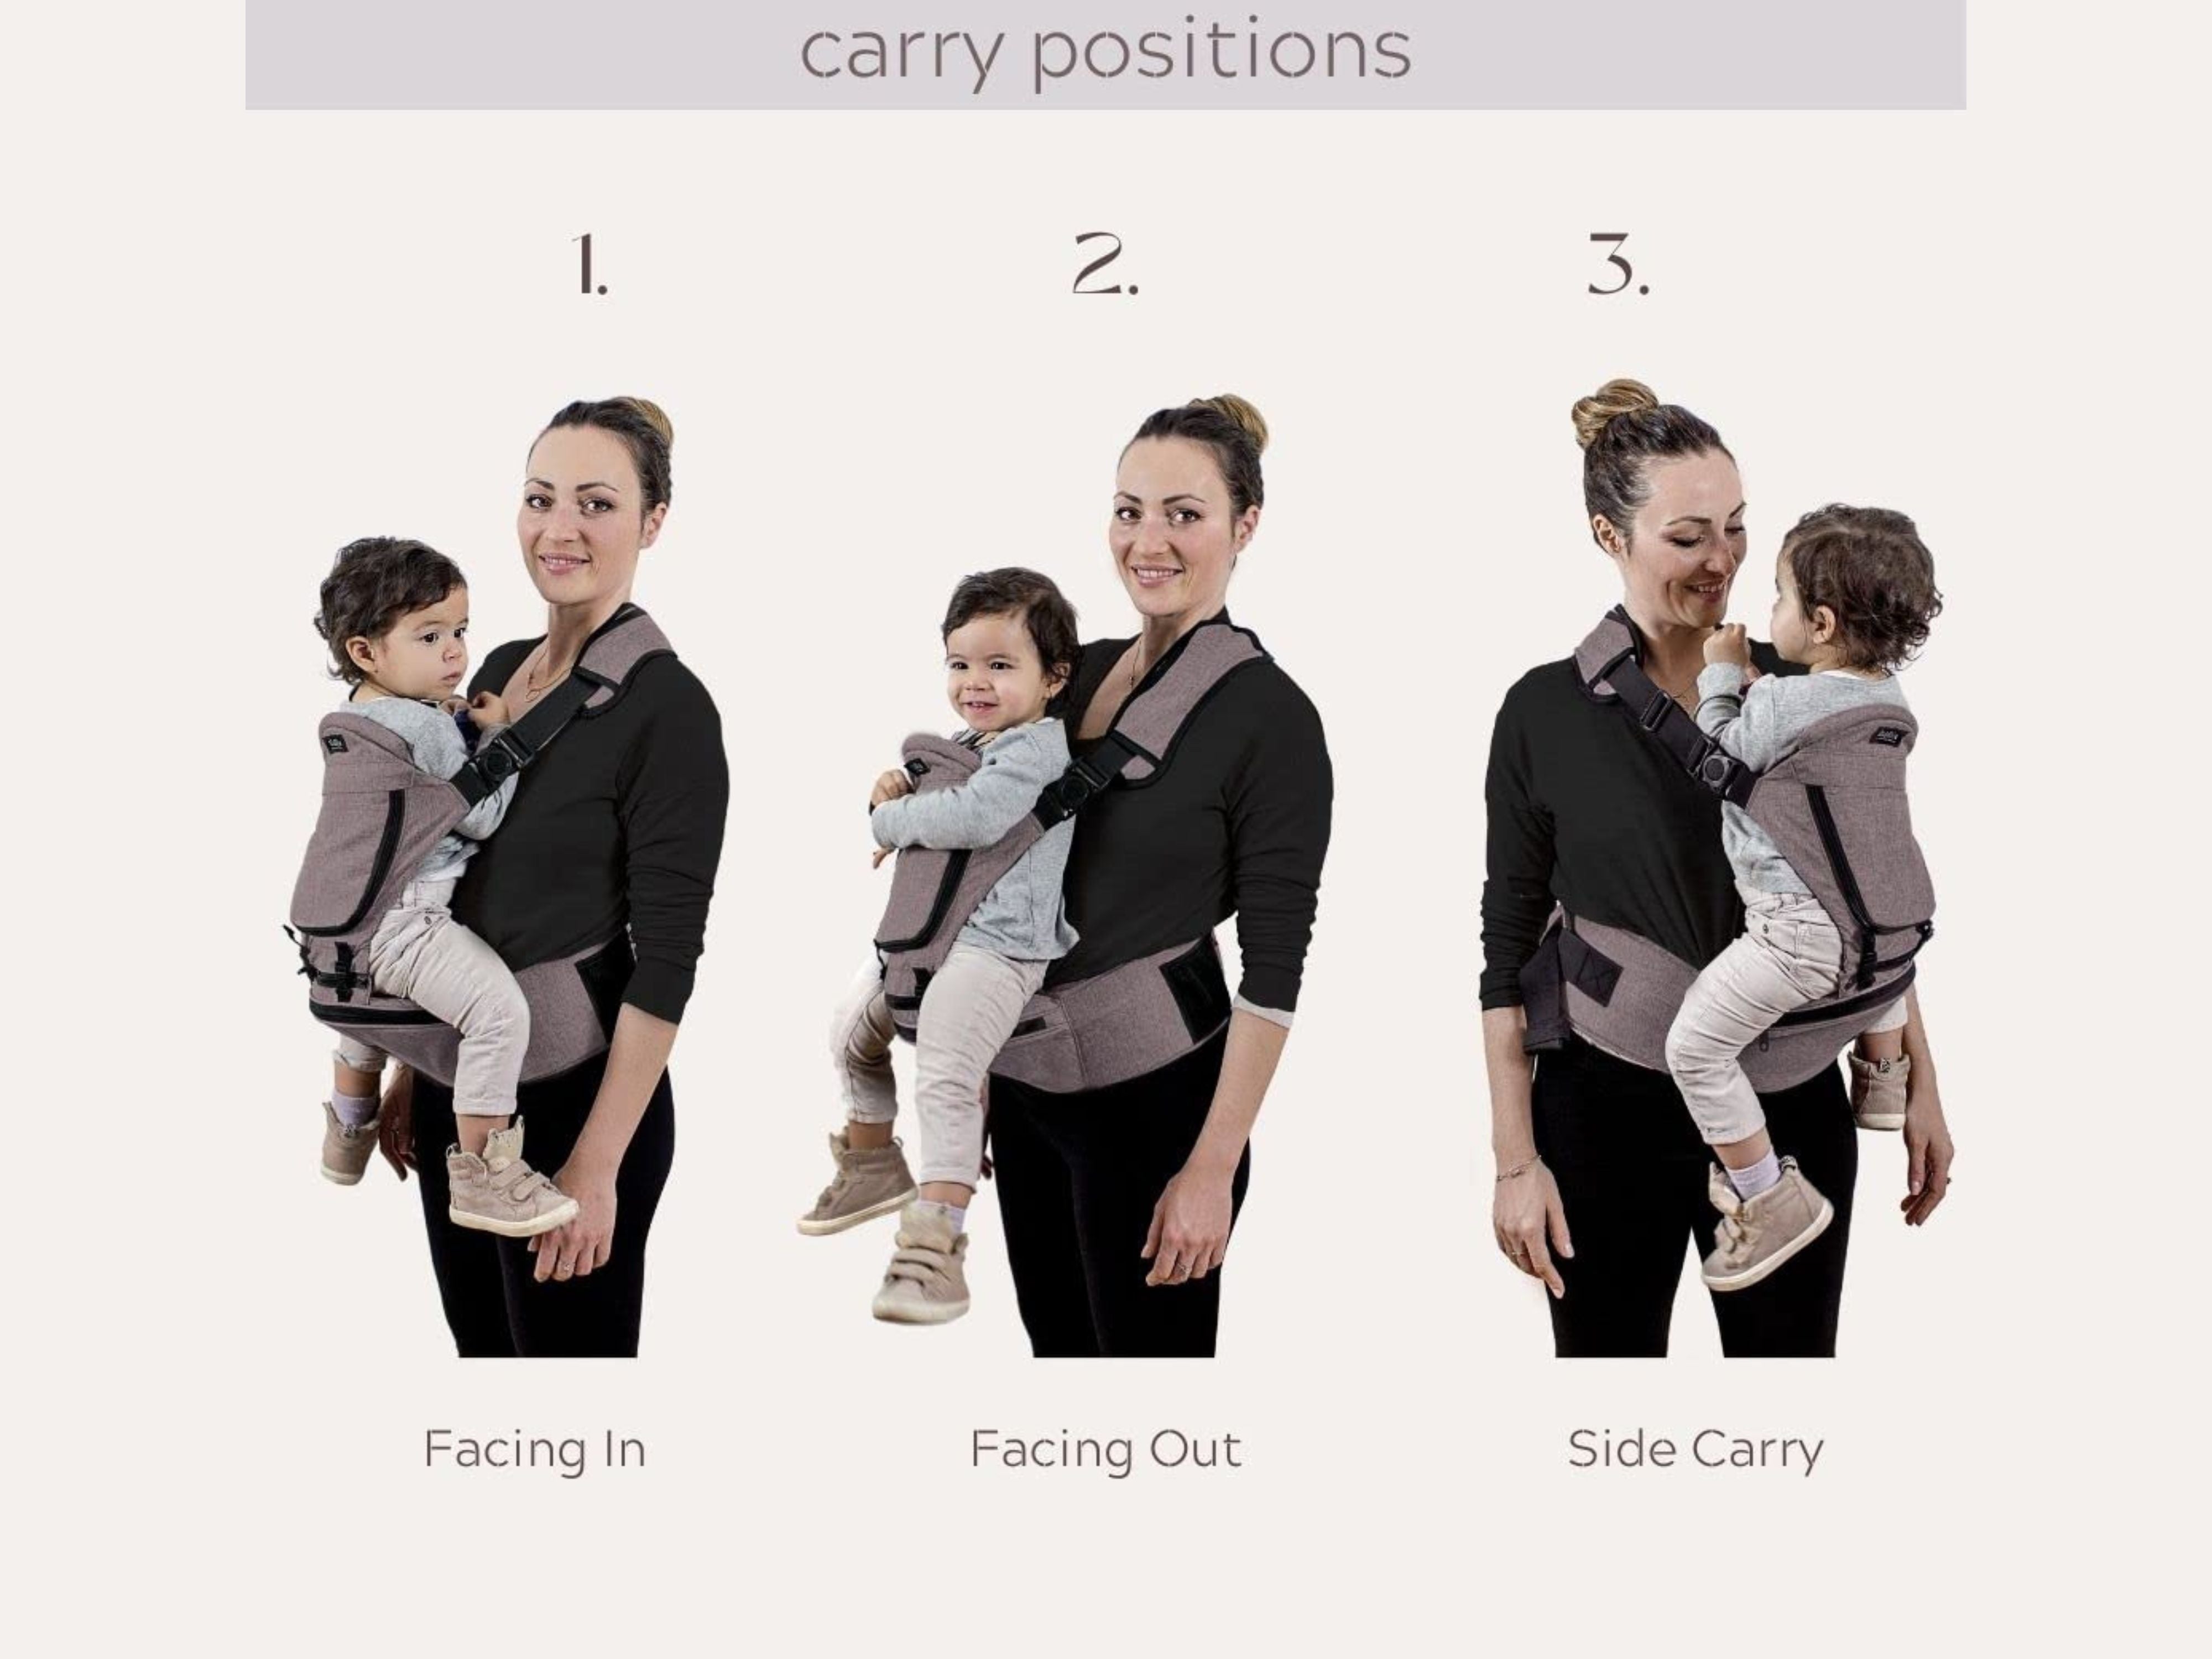 three different carry positions from single strap shoulders